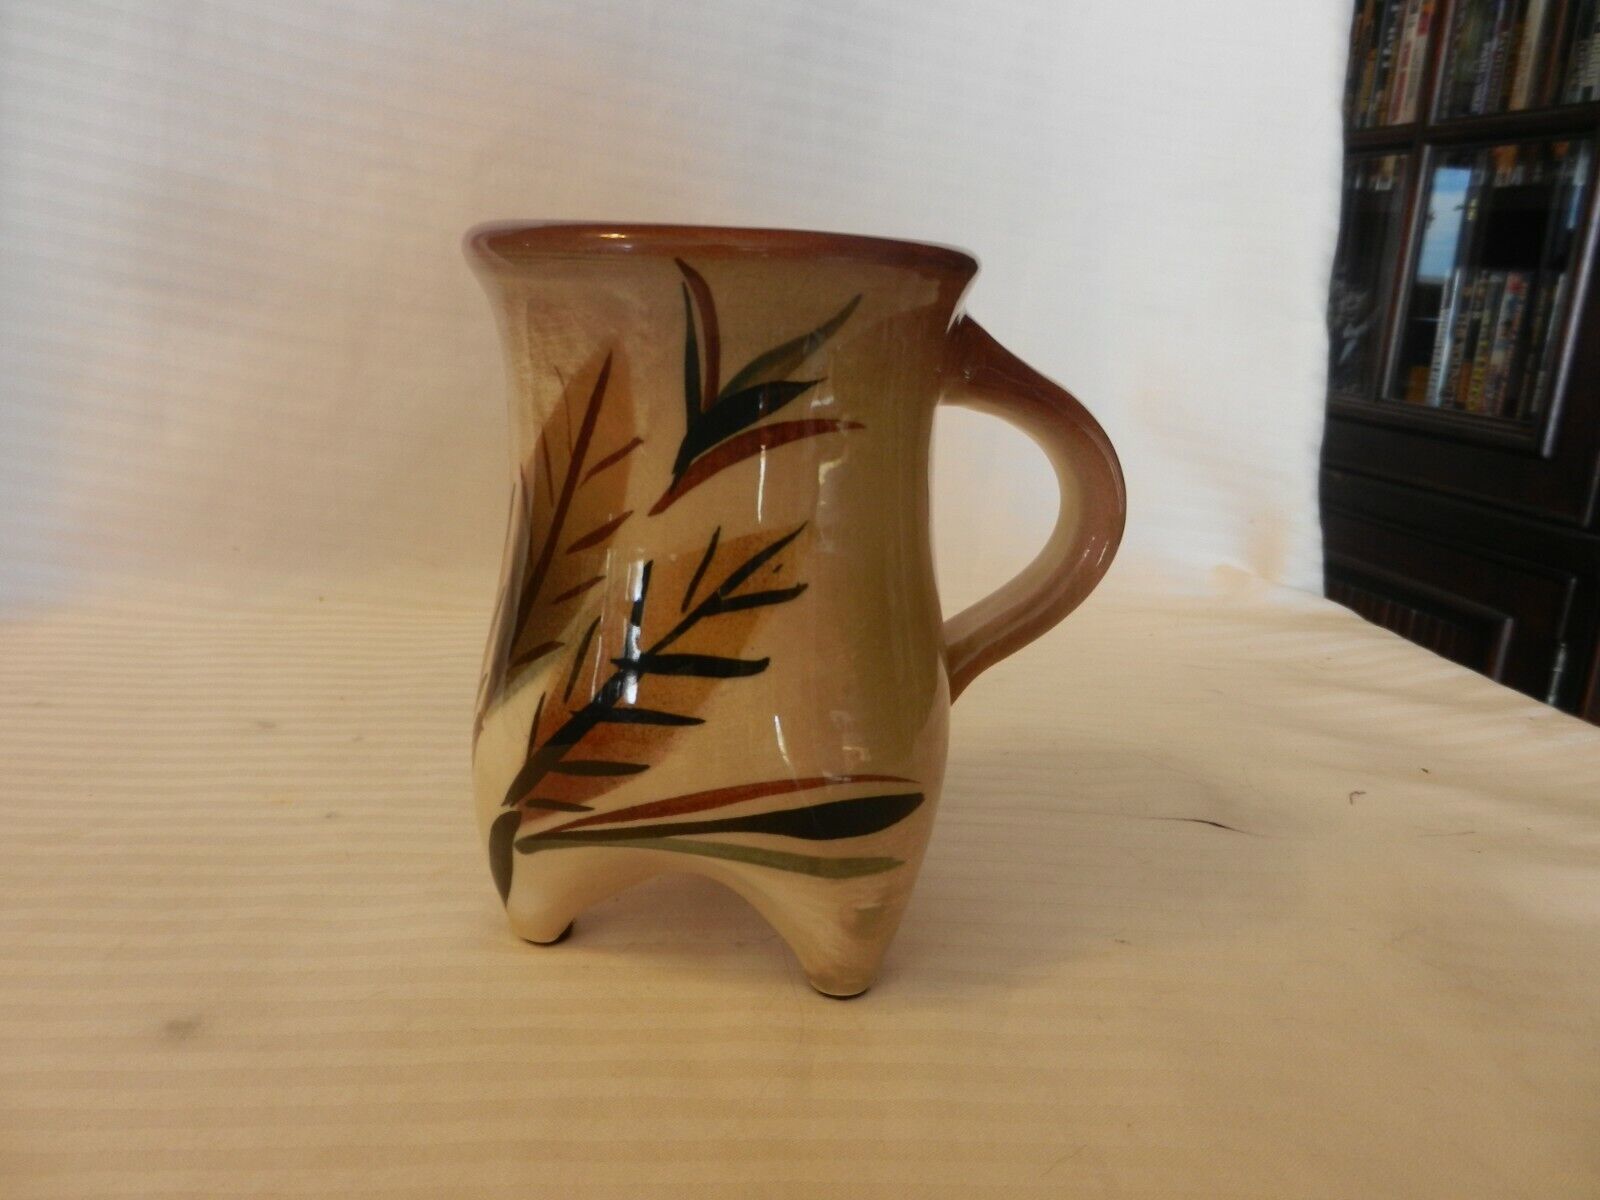 Primary image for Unique 3 Footed Ceramic Coffee Cup, Brown Tones with Leaves Design